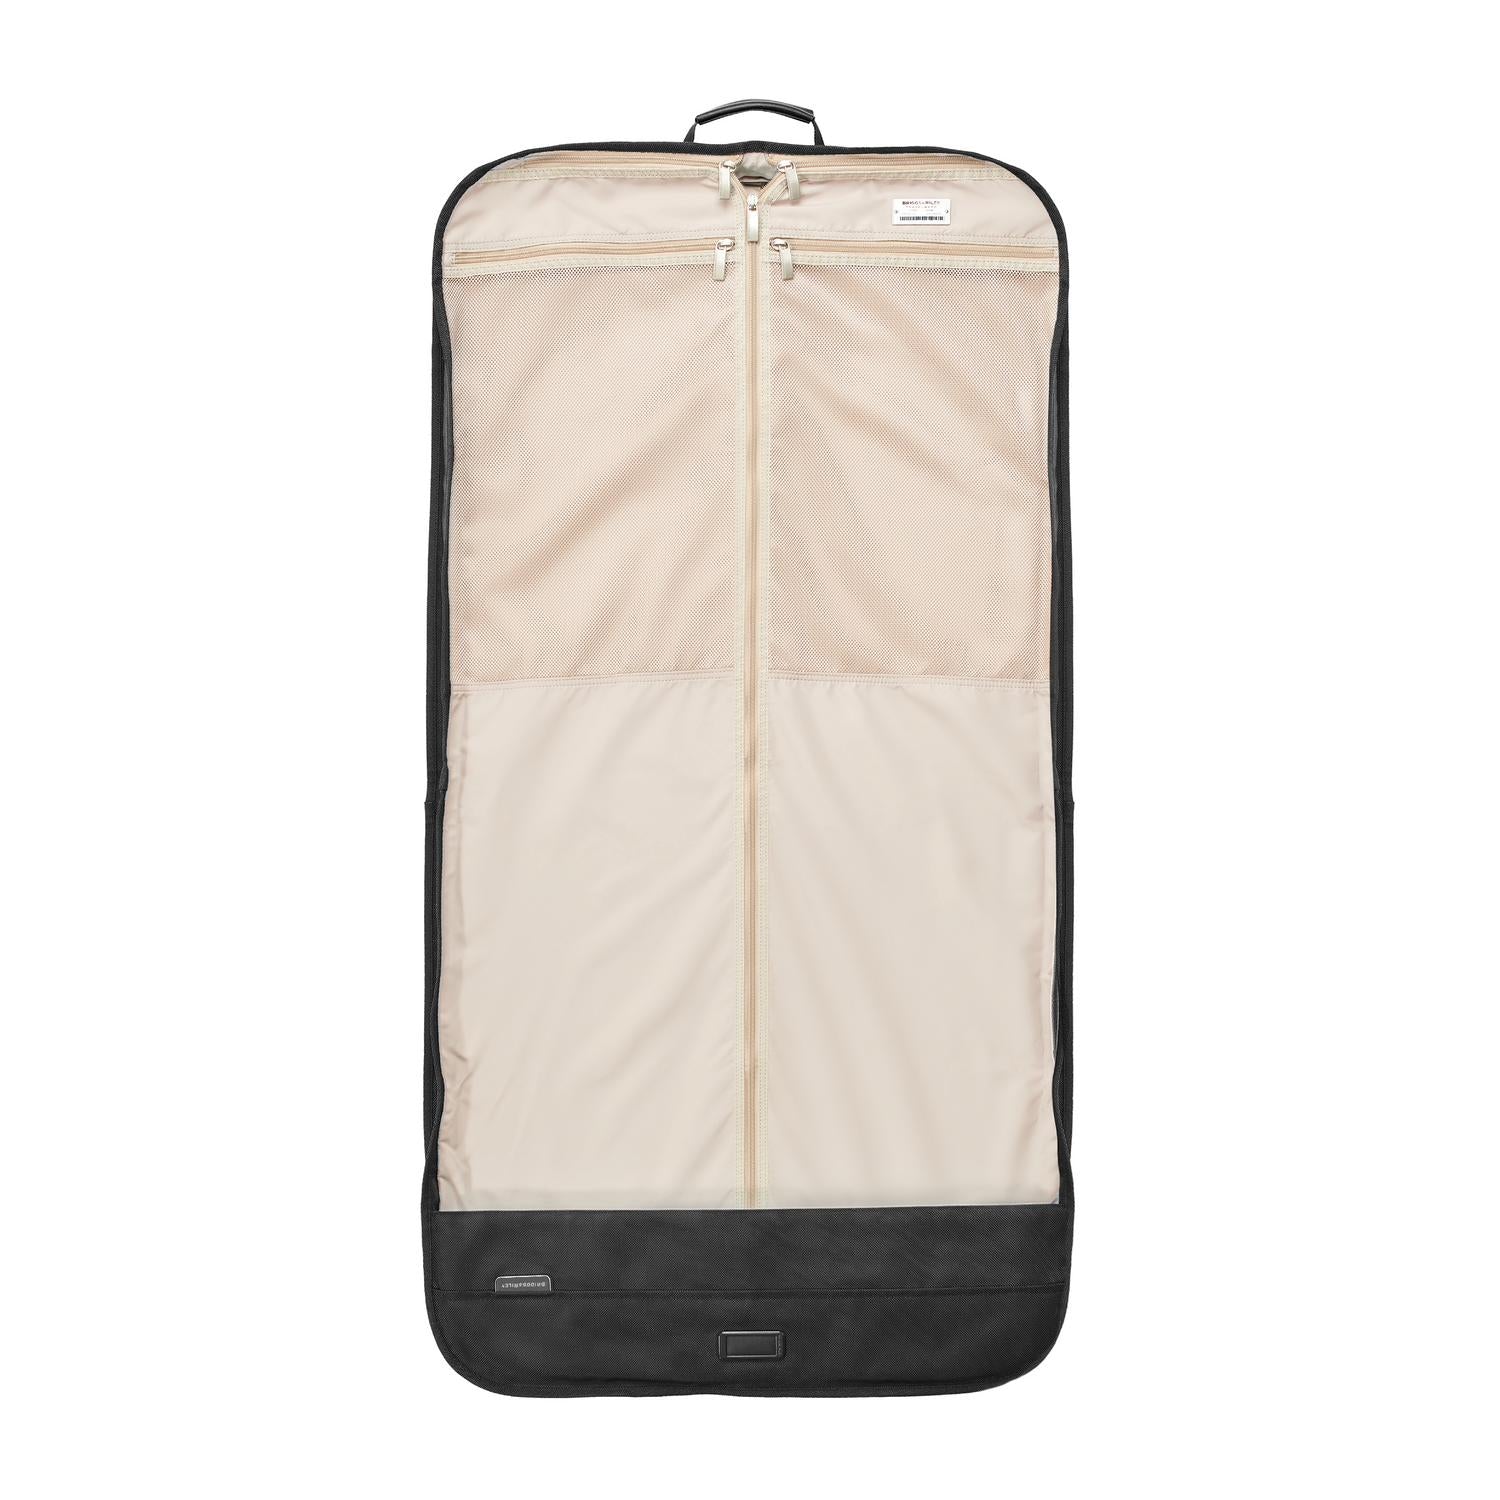 WallyBags  45” Premium Rolling Garment Bag with multiple pockets